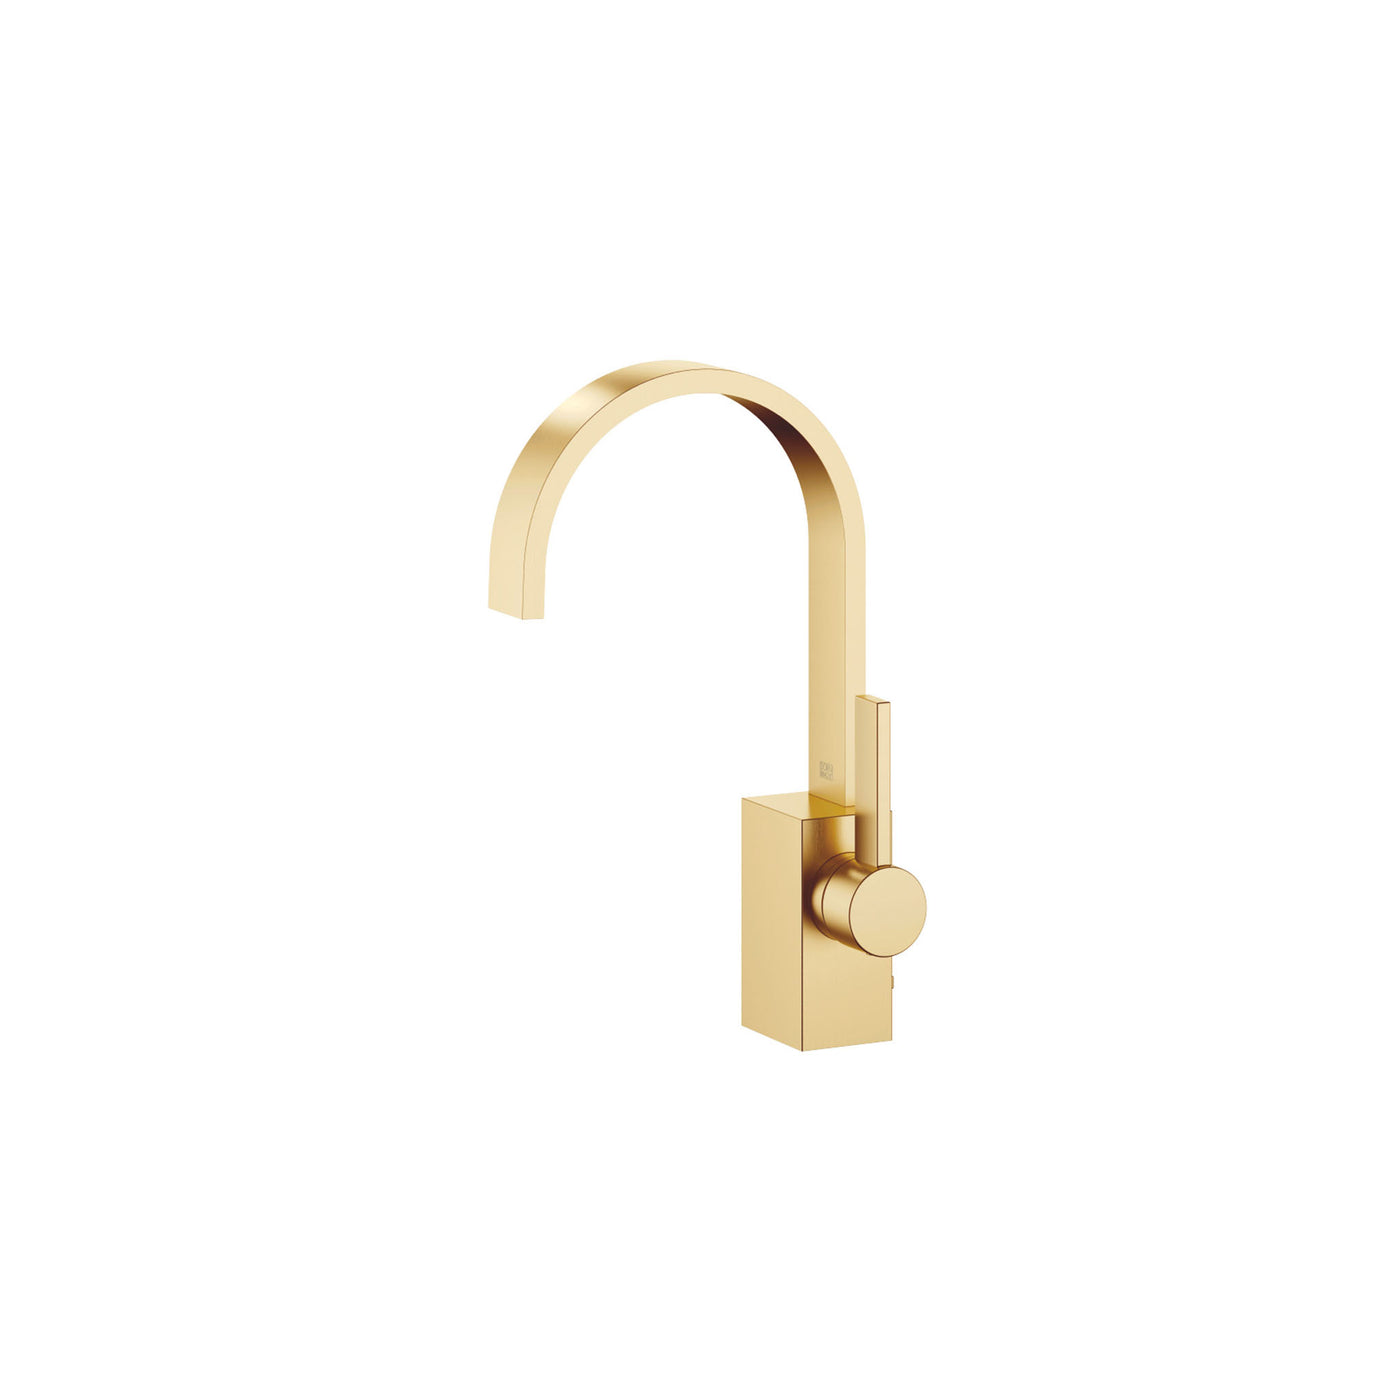 MEM Single-lever lavatory mixer with drain - Brushed brass (23kt gold)